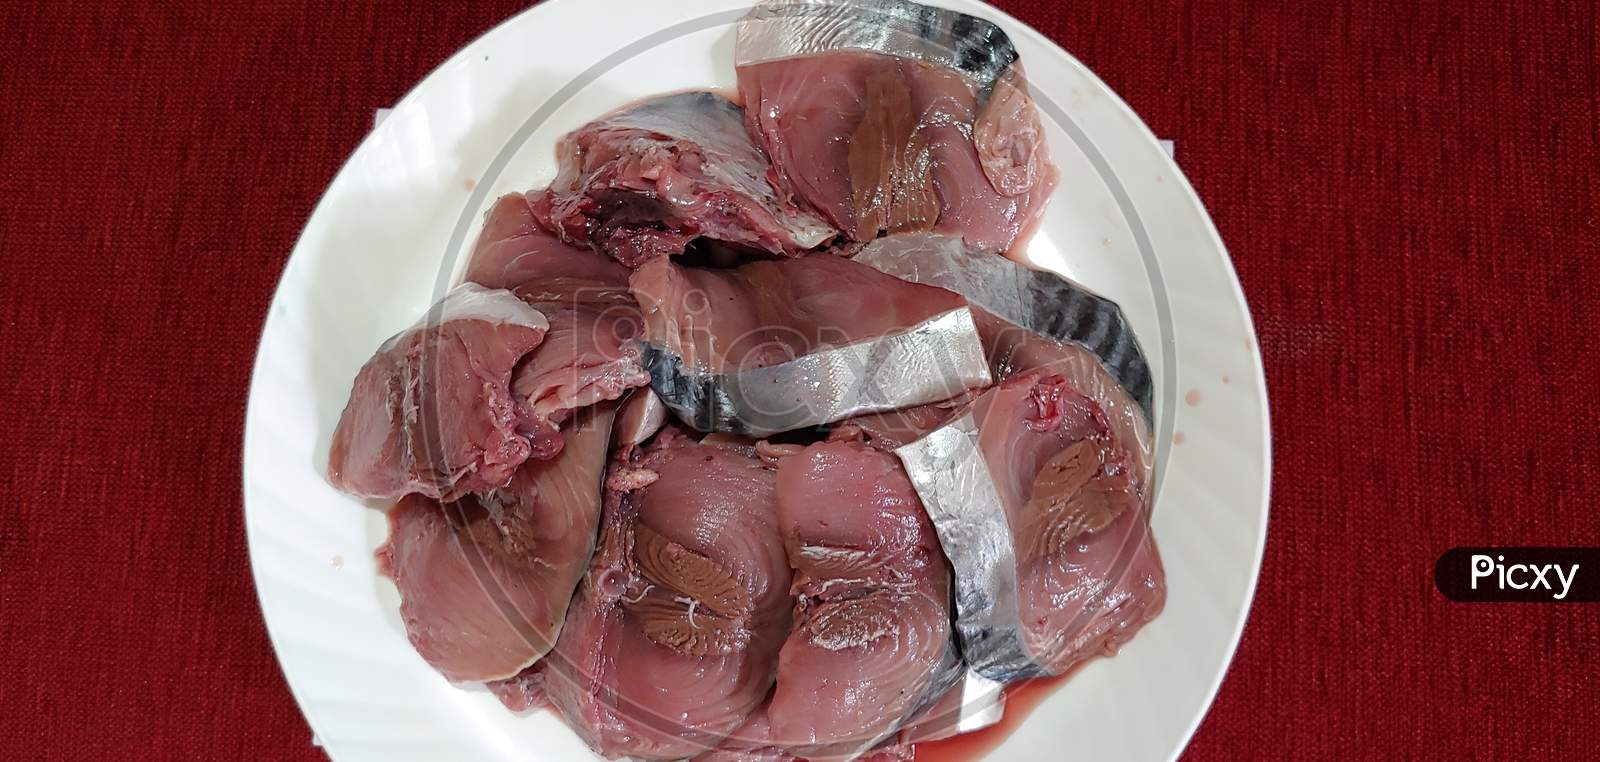 SLICED FRESH RAW TUNA FISH PREPARED FOR COOKING, ISOLATED ON A WHITE PLATE